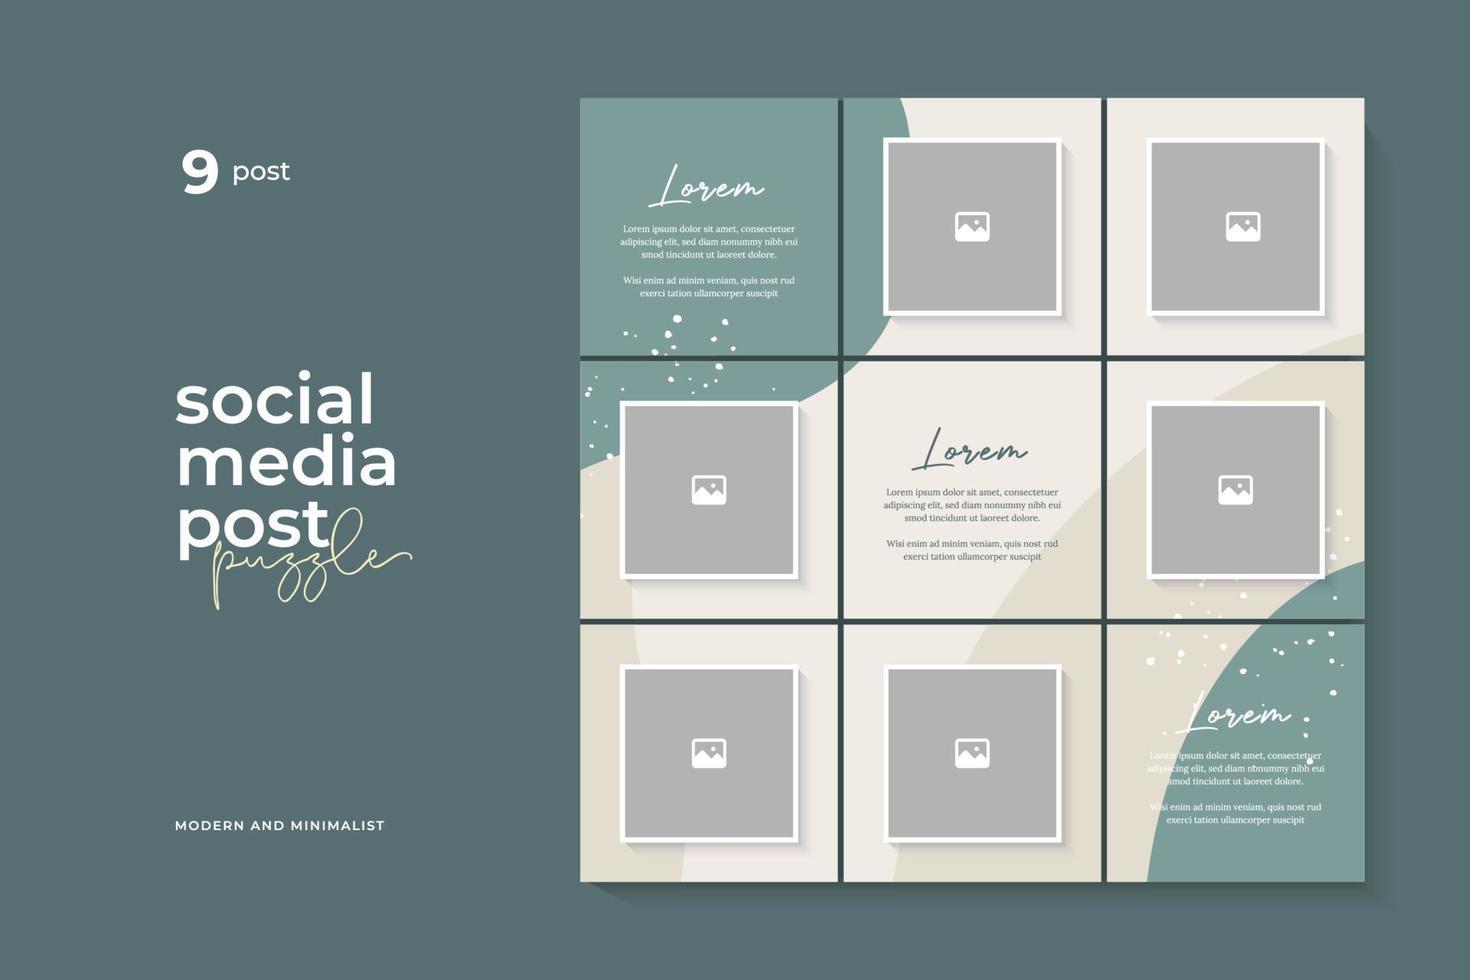 Social media post puzzle template for business, fashion, photography, food etc. Abstract elements in beautiful pastel colors. vector